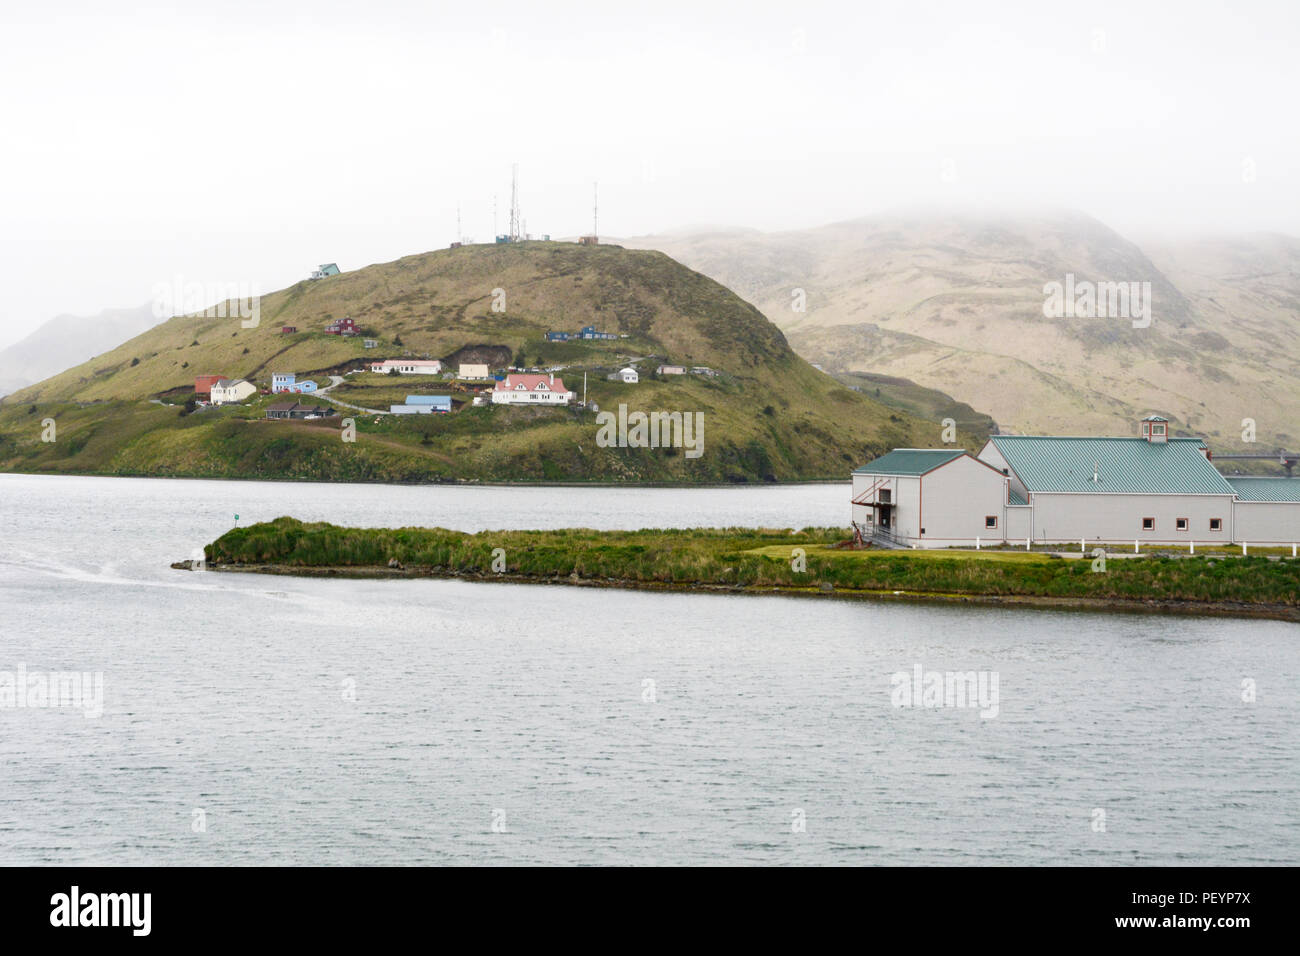 Part of the city of Unalaska, also known as Dutch Harbor, surrounded by mountains and the Bering Sea, Unalaska Island, Aleutian archipelago, Alaska. Stock Photo